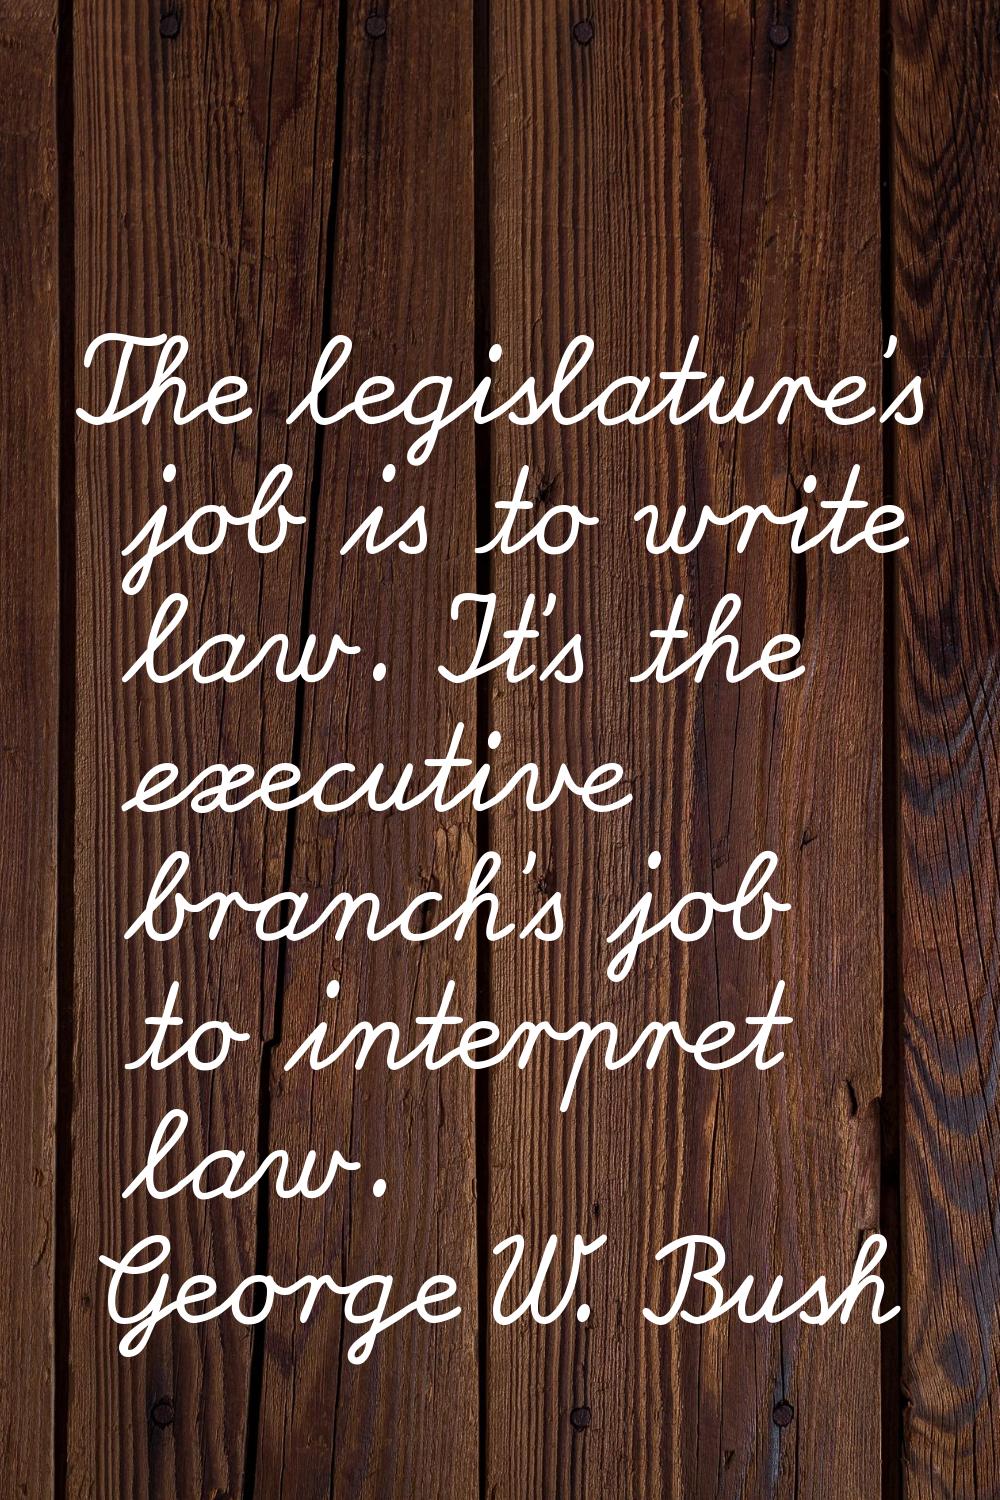 The legislature's job is to write law. It's the executive branch's job to interpret law.